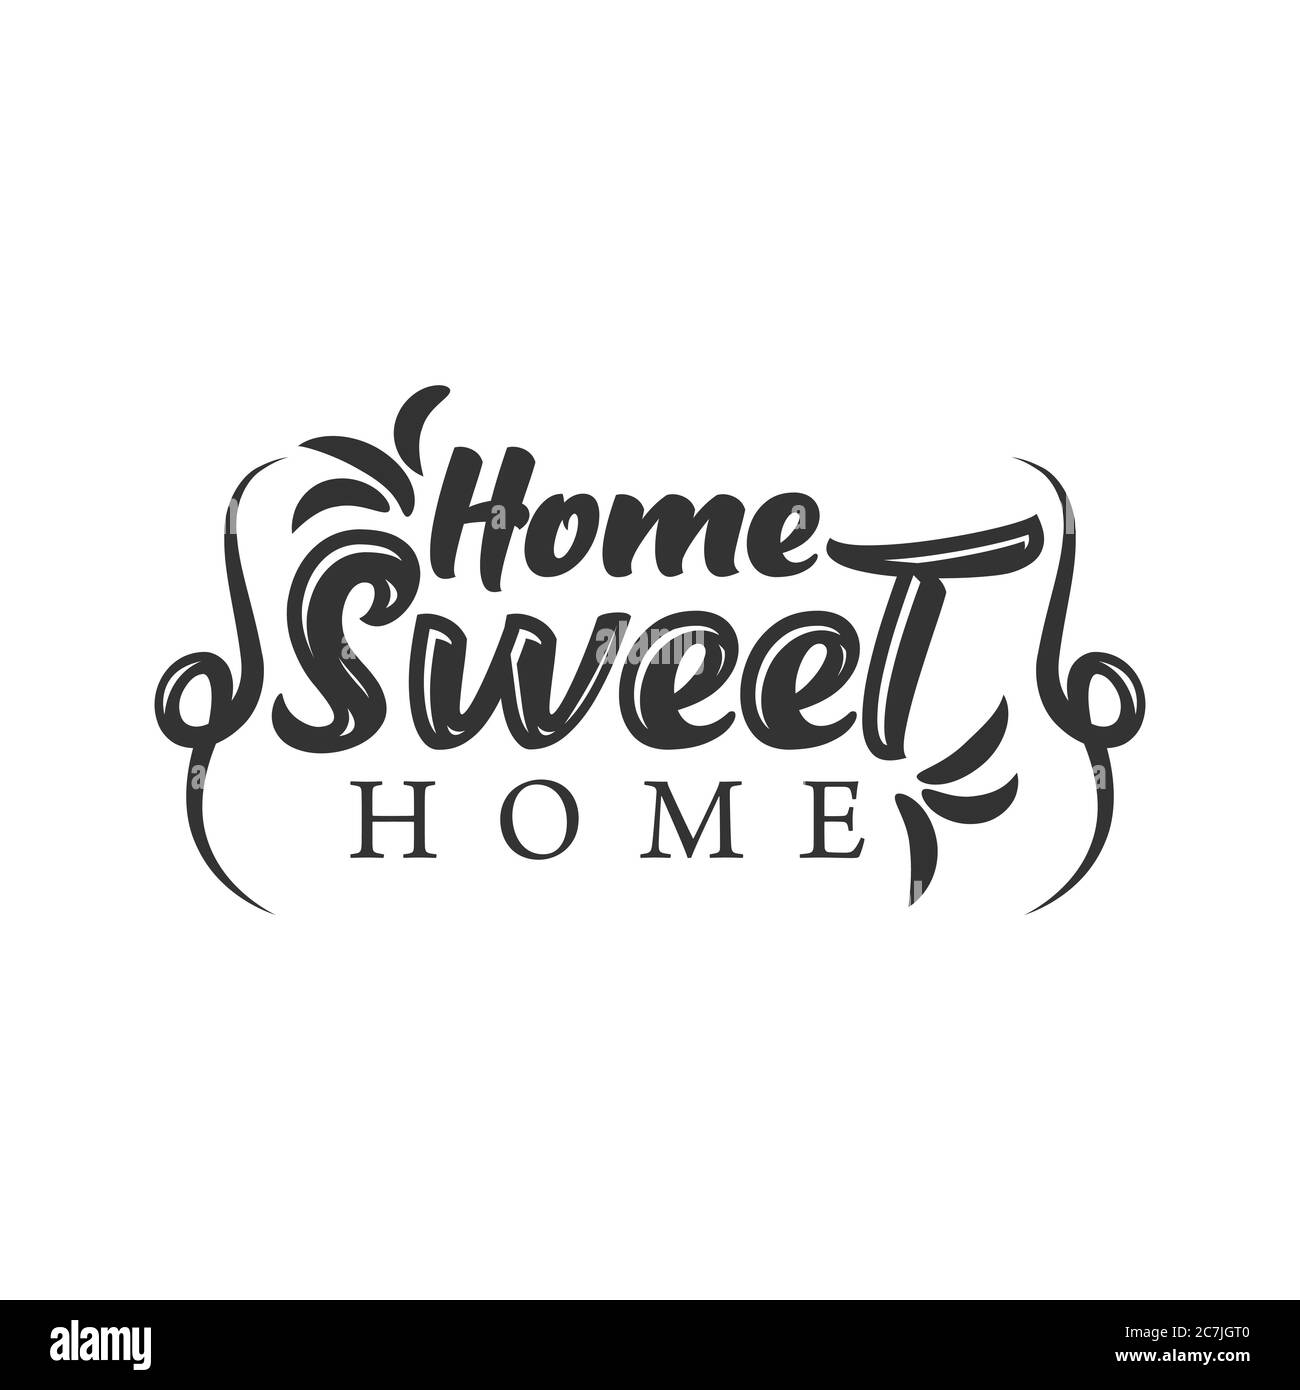 Home Sweet Home - Typography poster. Handmade lettering print. Vector vintage illustration with house hood and lovely heart and incense chimney. Stock Vector